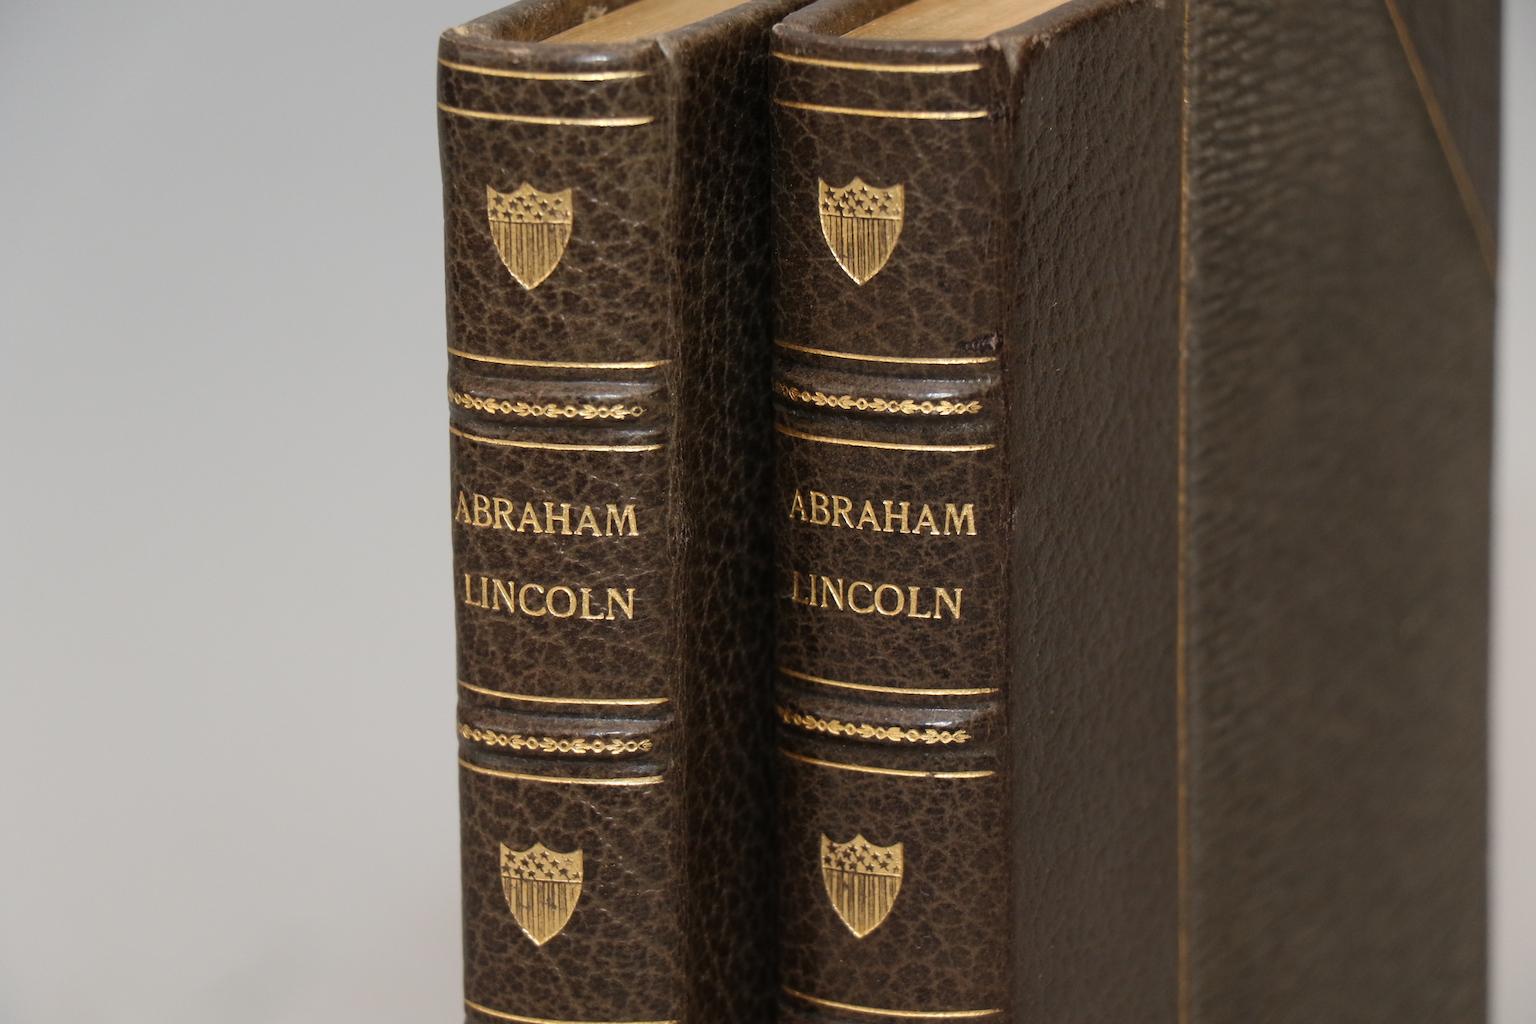 First edition. Leatherbound. 2 volumes. Bound in 3/4 grey Morocco with top edges gilt, raised bands, & gilt panels. Very good. Published in Springfield, MA by Gurdon Bill in 1866.

All listed dimensions are for a single volume.